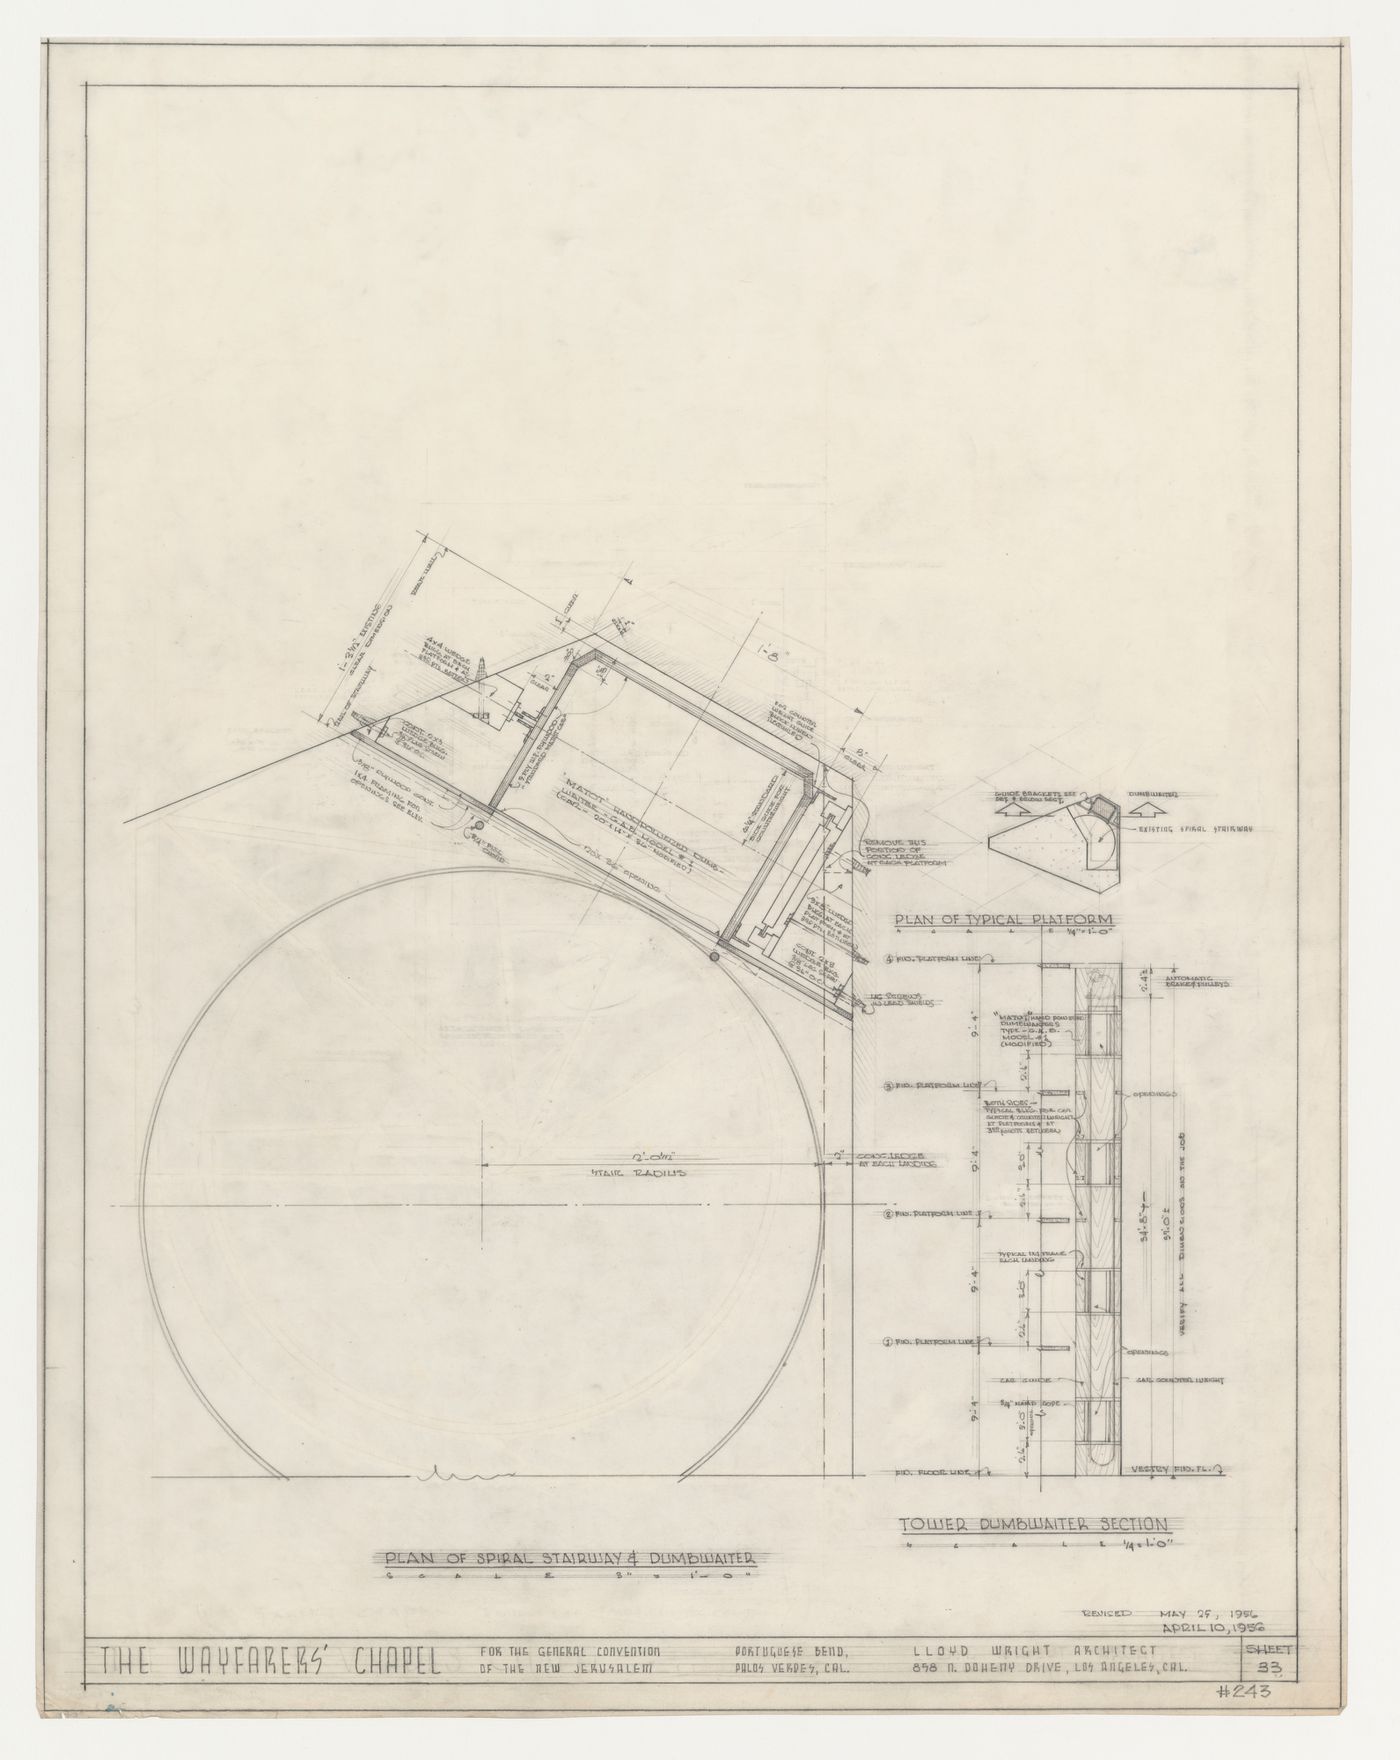 Wayfarers' Chapel, Palos Verdes, California: Plan for campanile stairway and plan and section for dumbwaiter